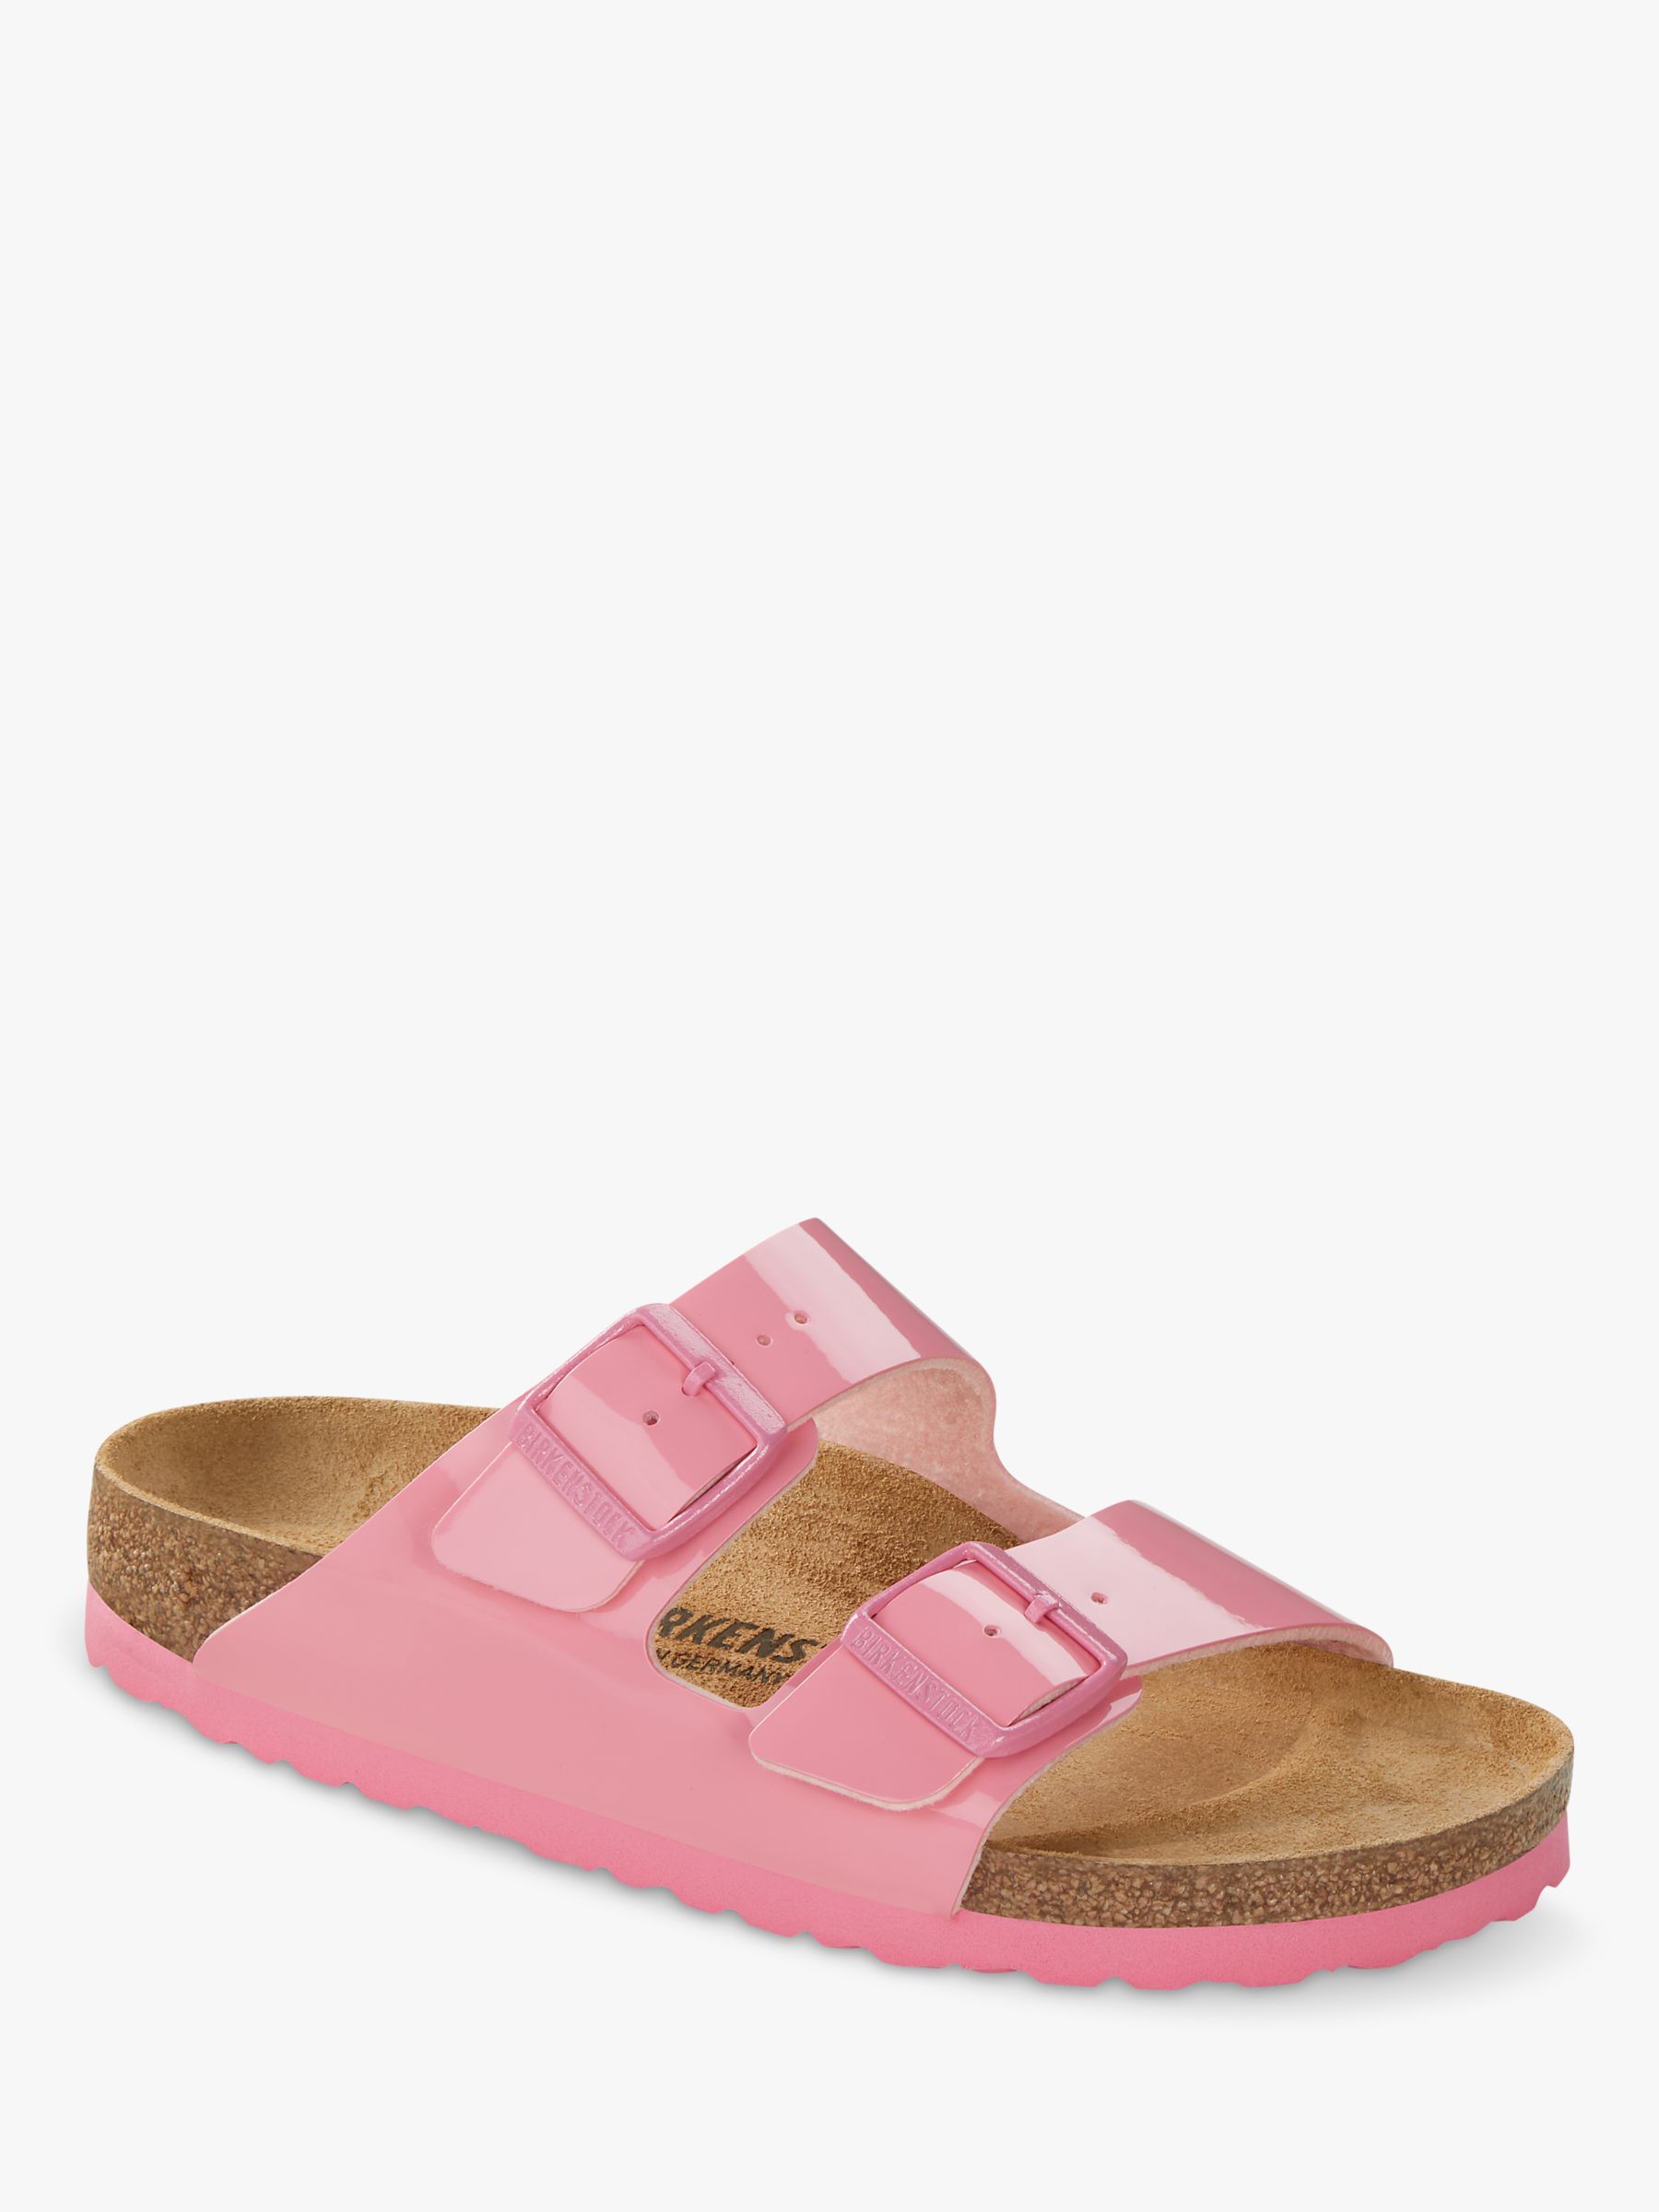 Birkenstock Arizona Regular Fit Patent Leather Sandals, Candy Pink at ...